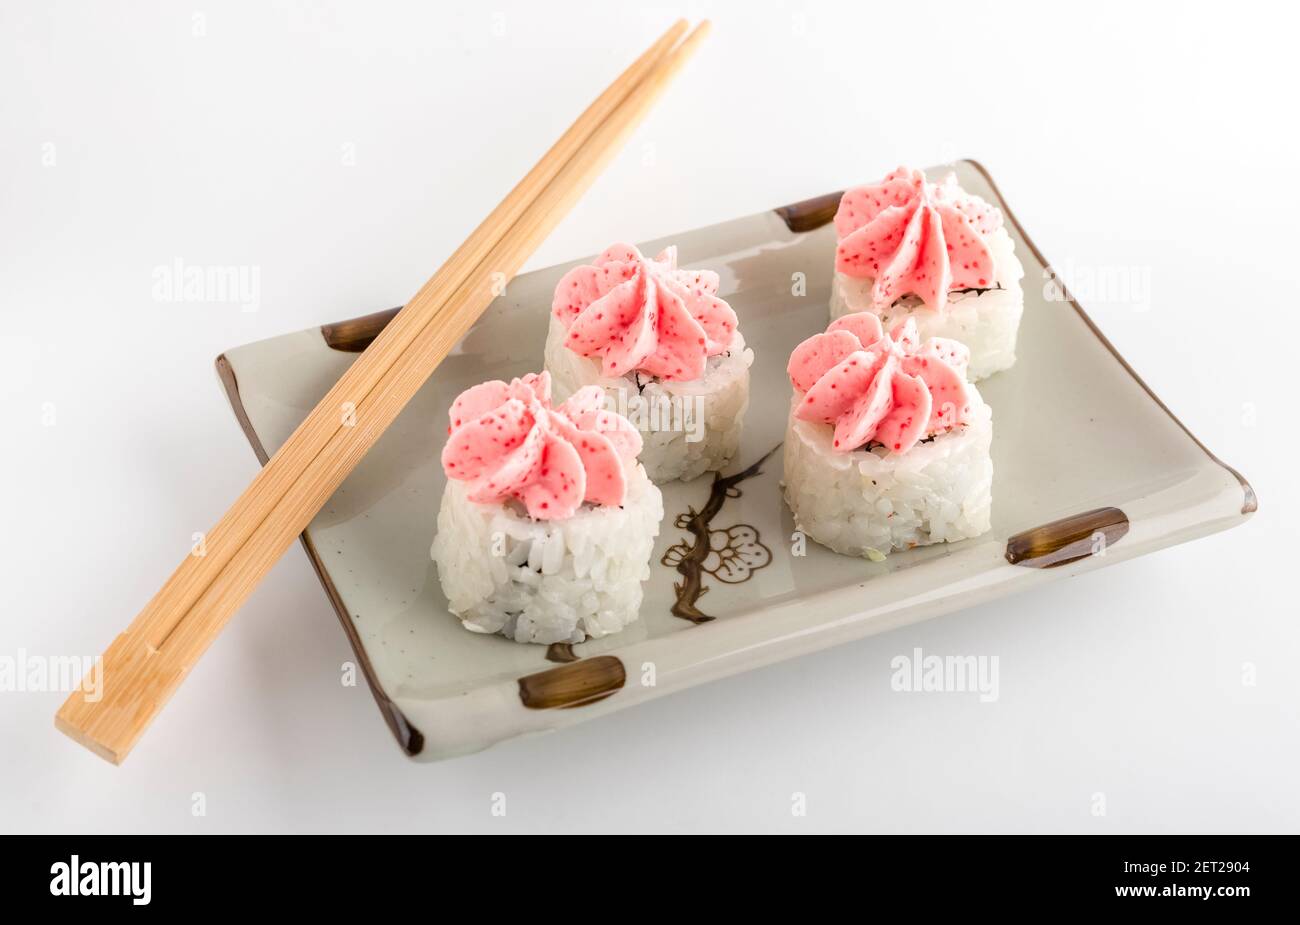 sushi and rolls on a plate. White background. Serving Japanese cuisine Stock Photo